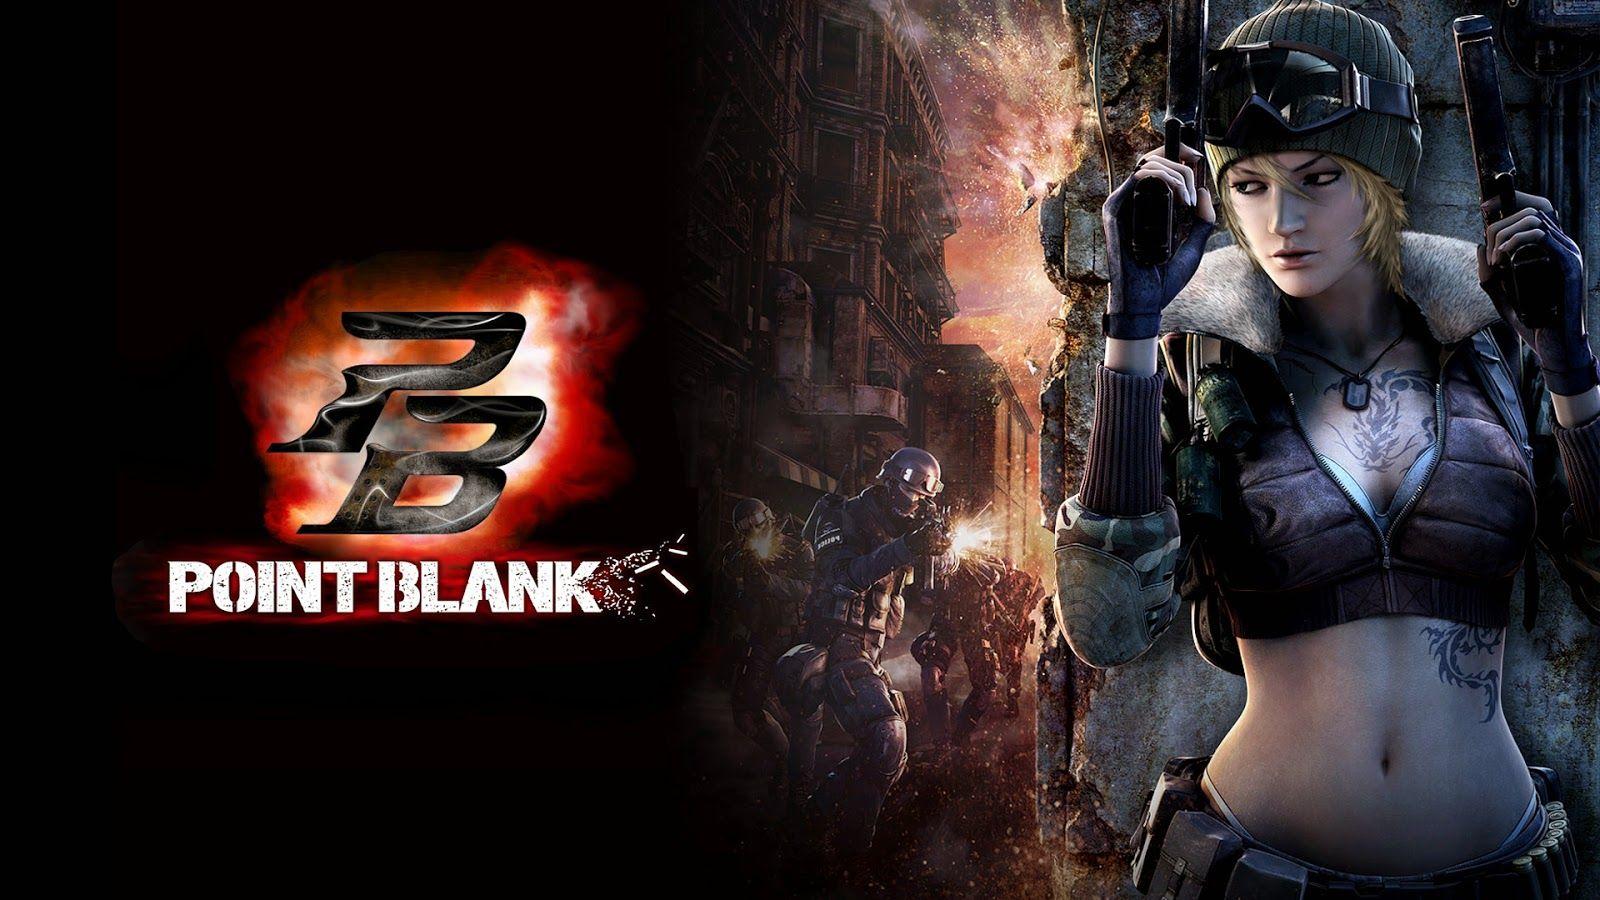 Wallpaper Point Blank HD. Your Title. Free Wallpaper